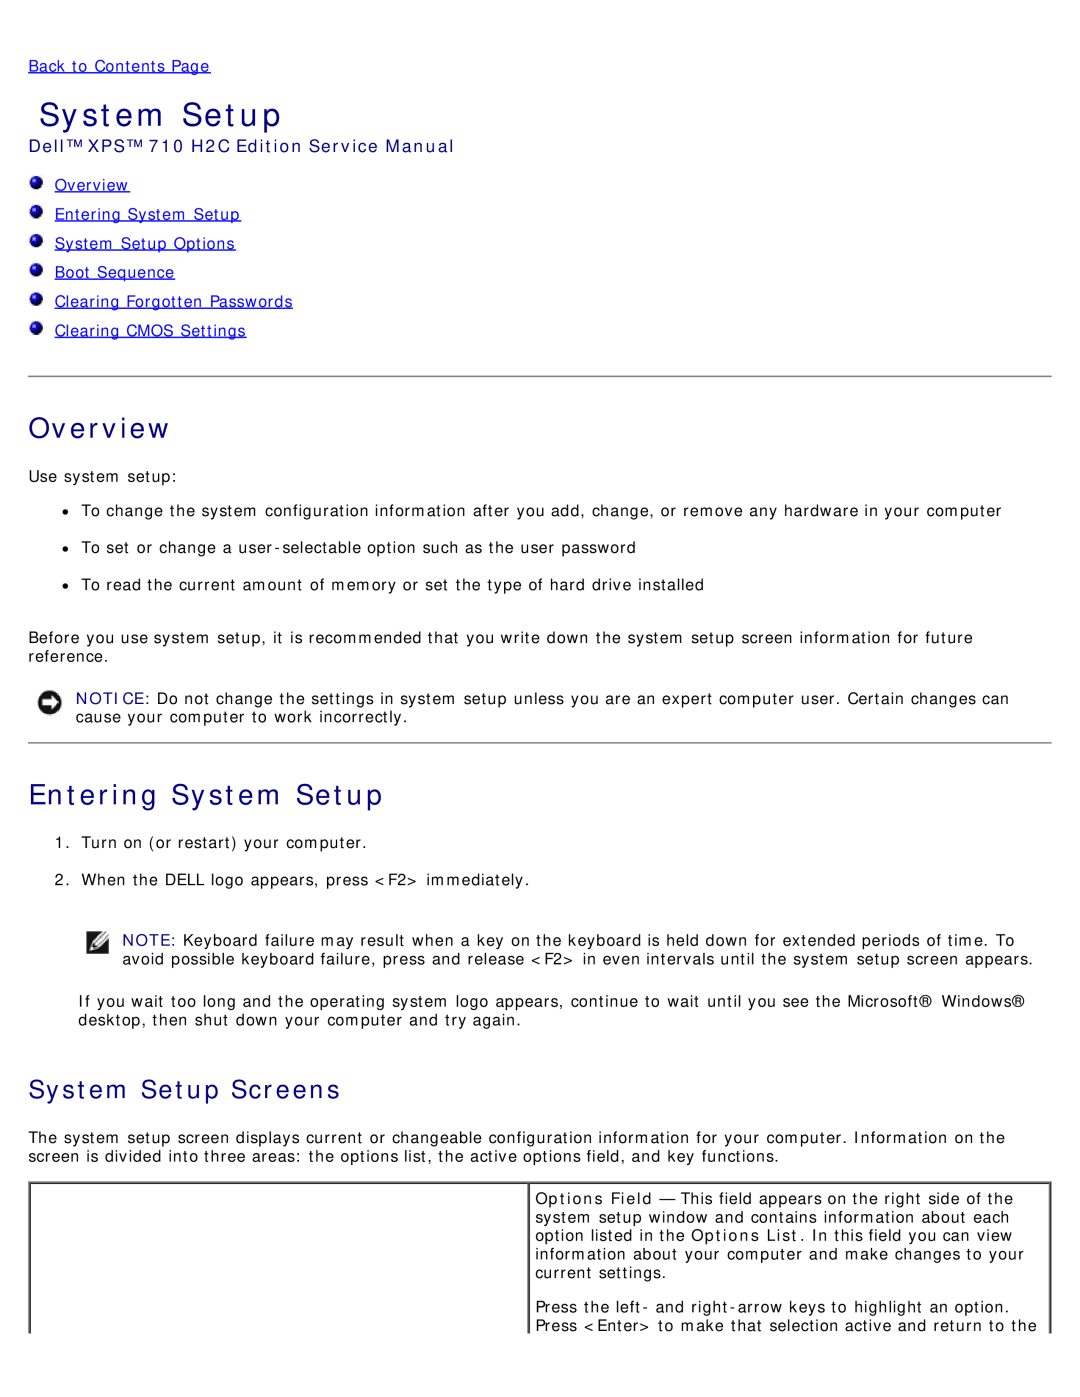 Dell DCDO Overview, Entering System Setup, System Setup Screens, Dell XPS 710 H2C Edition Service Manual 